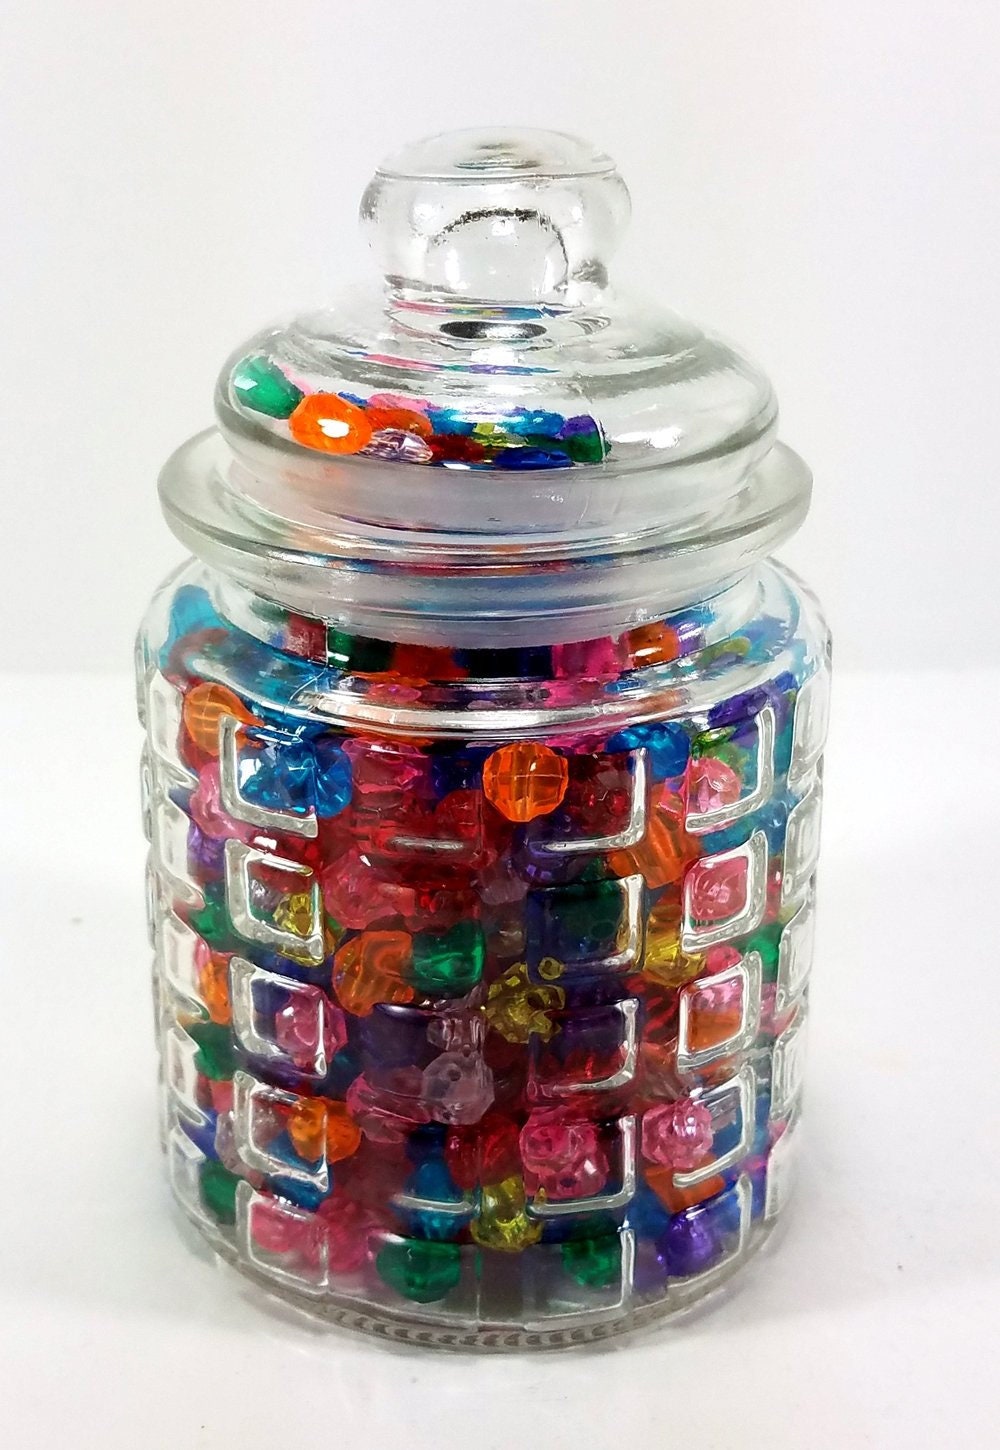 Glass Jar Reusable Decorative with Lid Airtight Jar for Candy Pasta Snacks